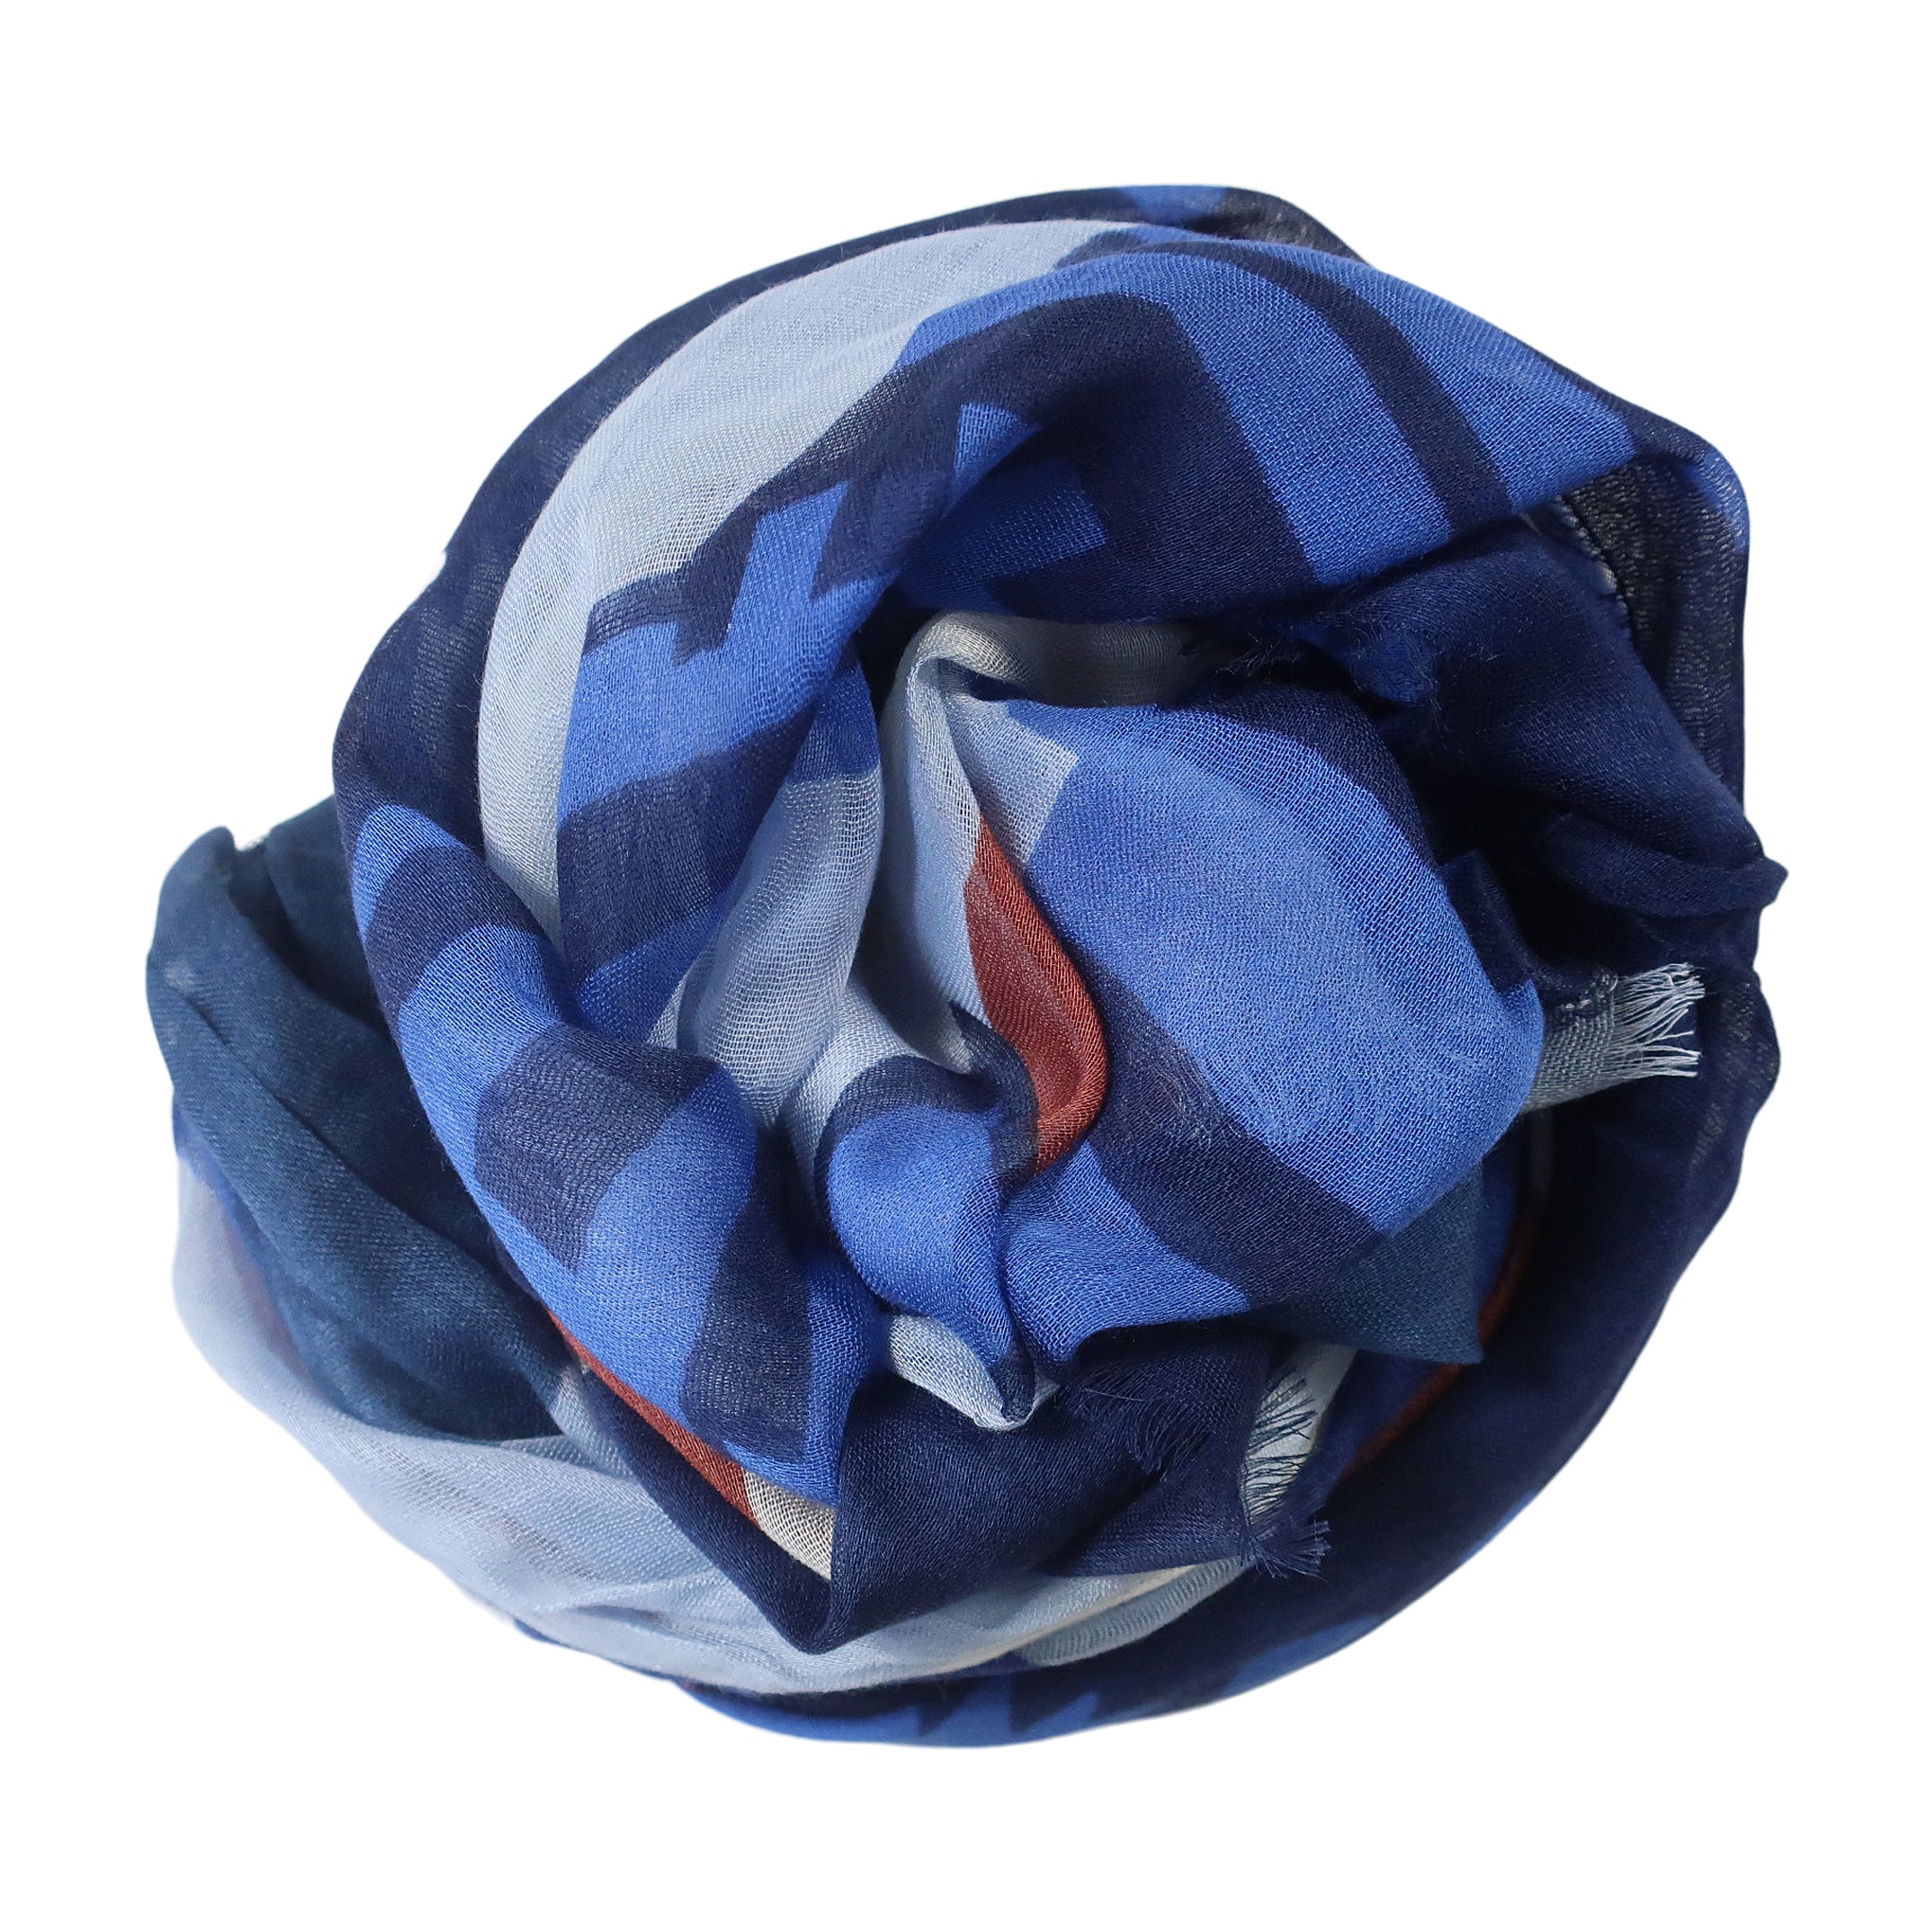 Blue Pacific Vintage Locale San Francisco Cashmere and Silk Scarf